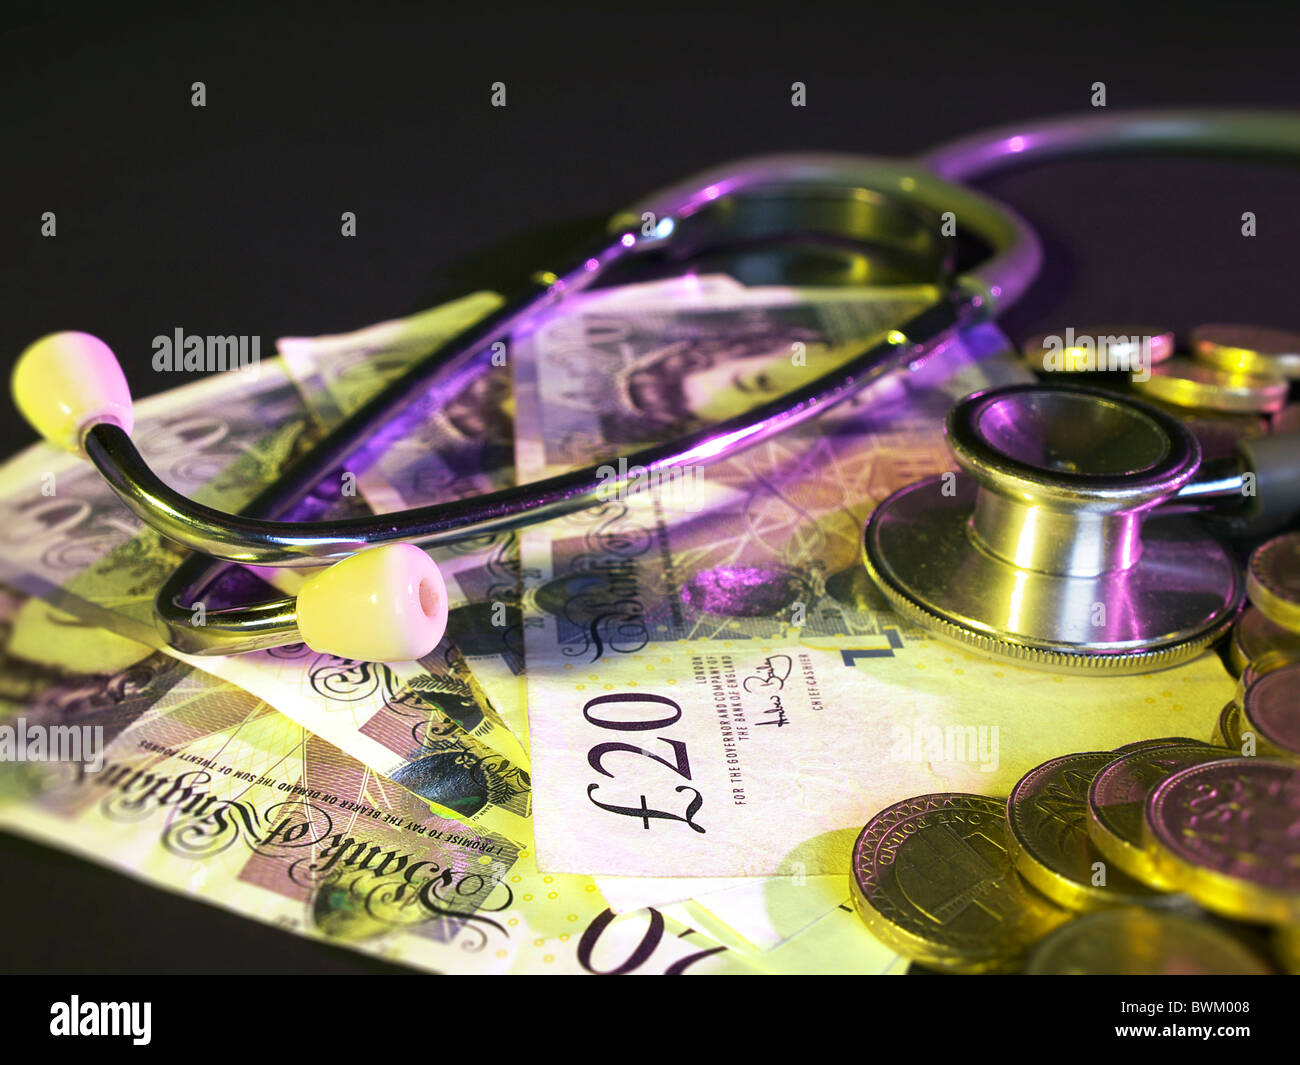 British pound coins stacked in background on a bed of twenty pound notes with a stethoscope Stock Photo